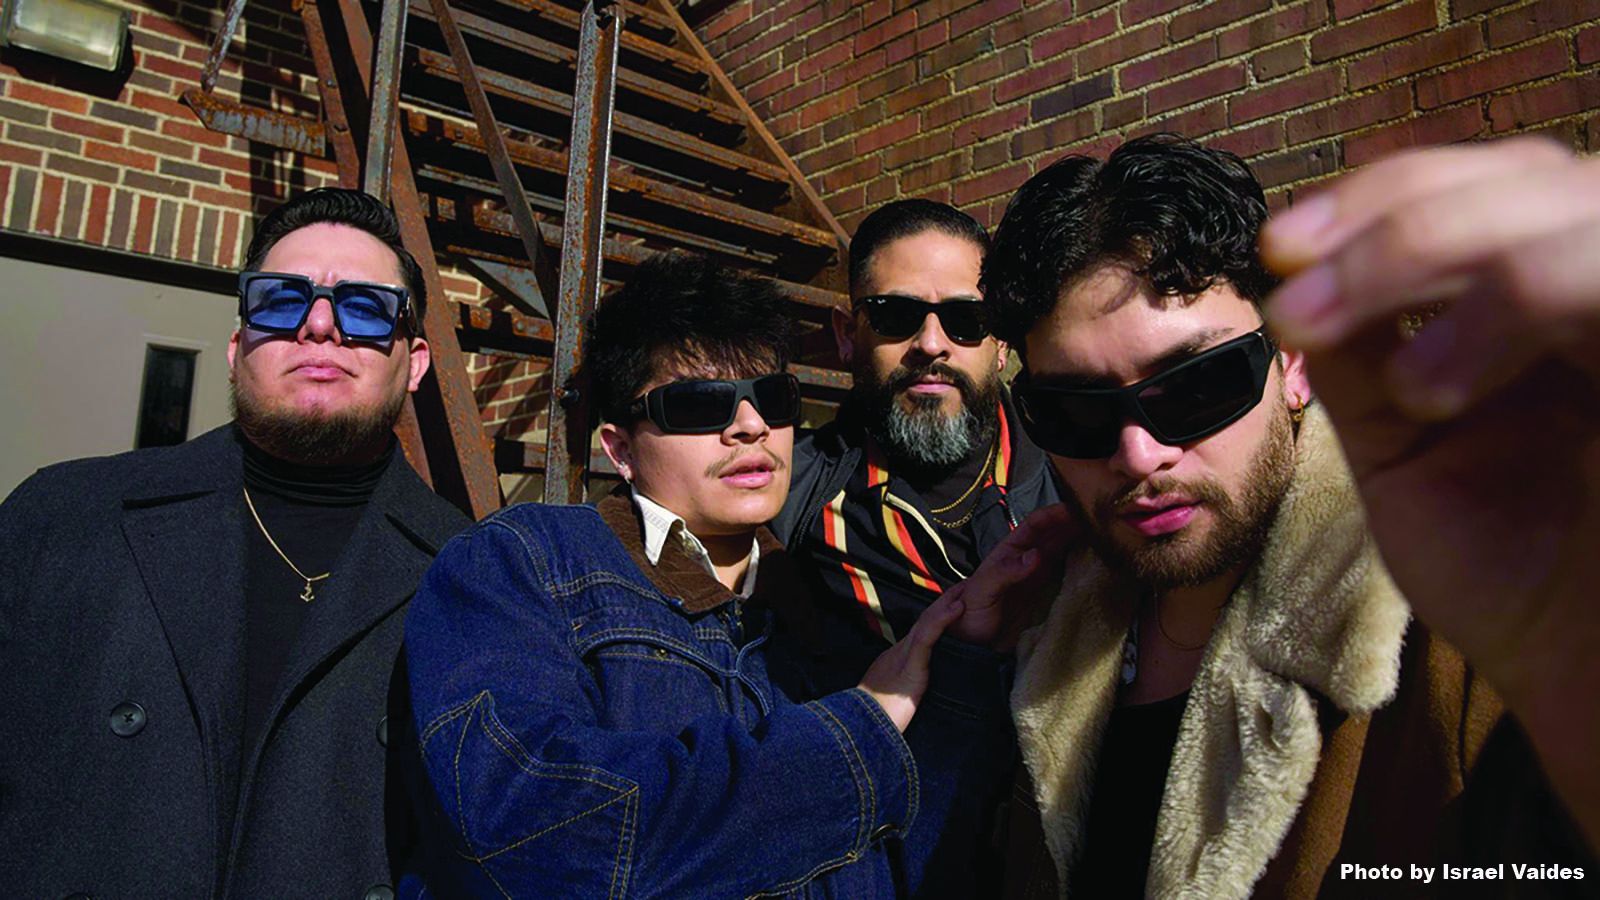 Los Electro will be among the performers Saturday, Dec. 9, at the annual Christmas at Baker Street Centre show. Members of Los Electro are, from left, Joab Castañeda, Daniel Vaides, Jesse Gutierrez, and David Vaides.